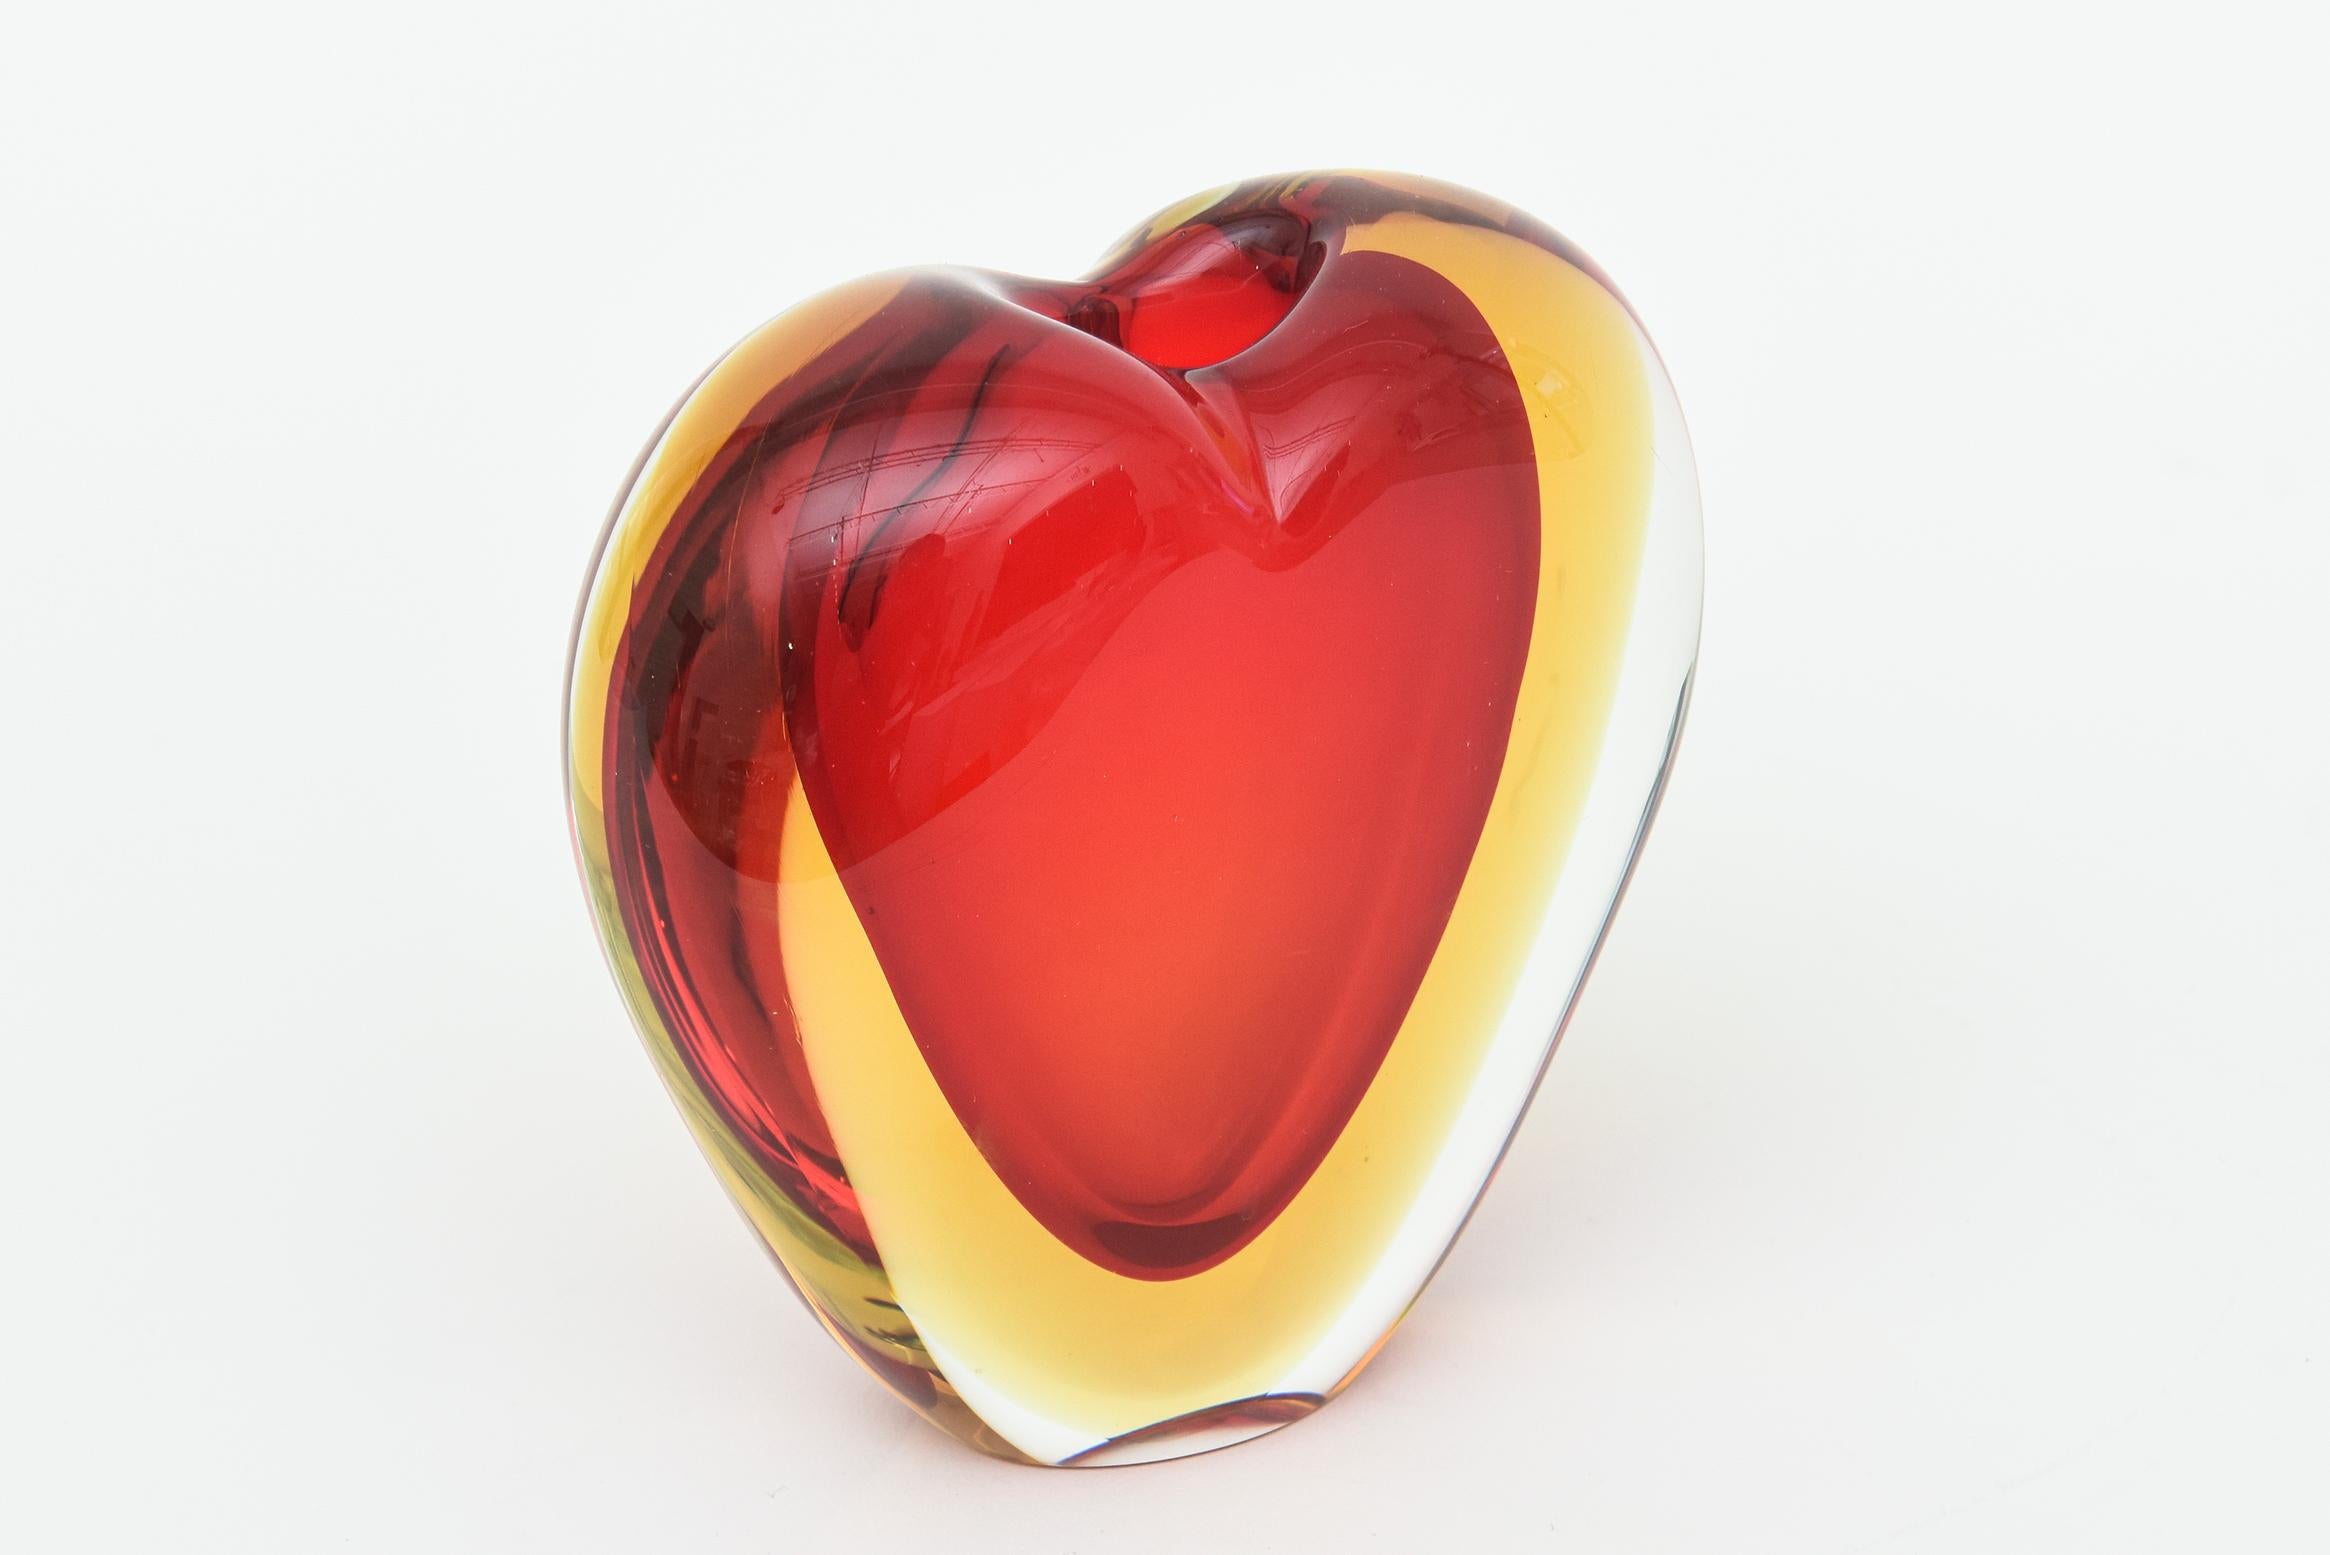 Vintage Murano Antonio da Ros for Cenedese Red, Yellow Sommerso Heart Vase In Good Condition For Sale In North Miami, FL